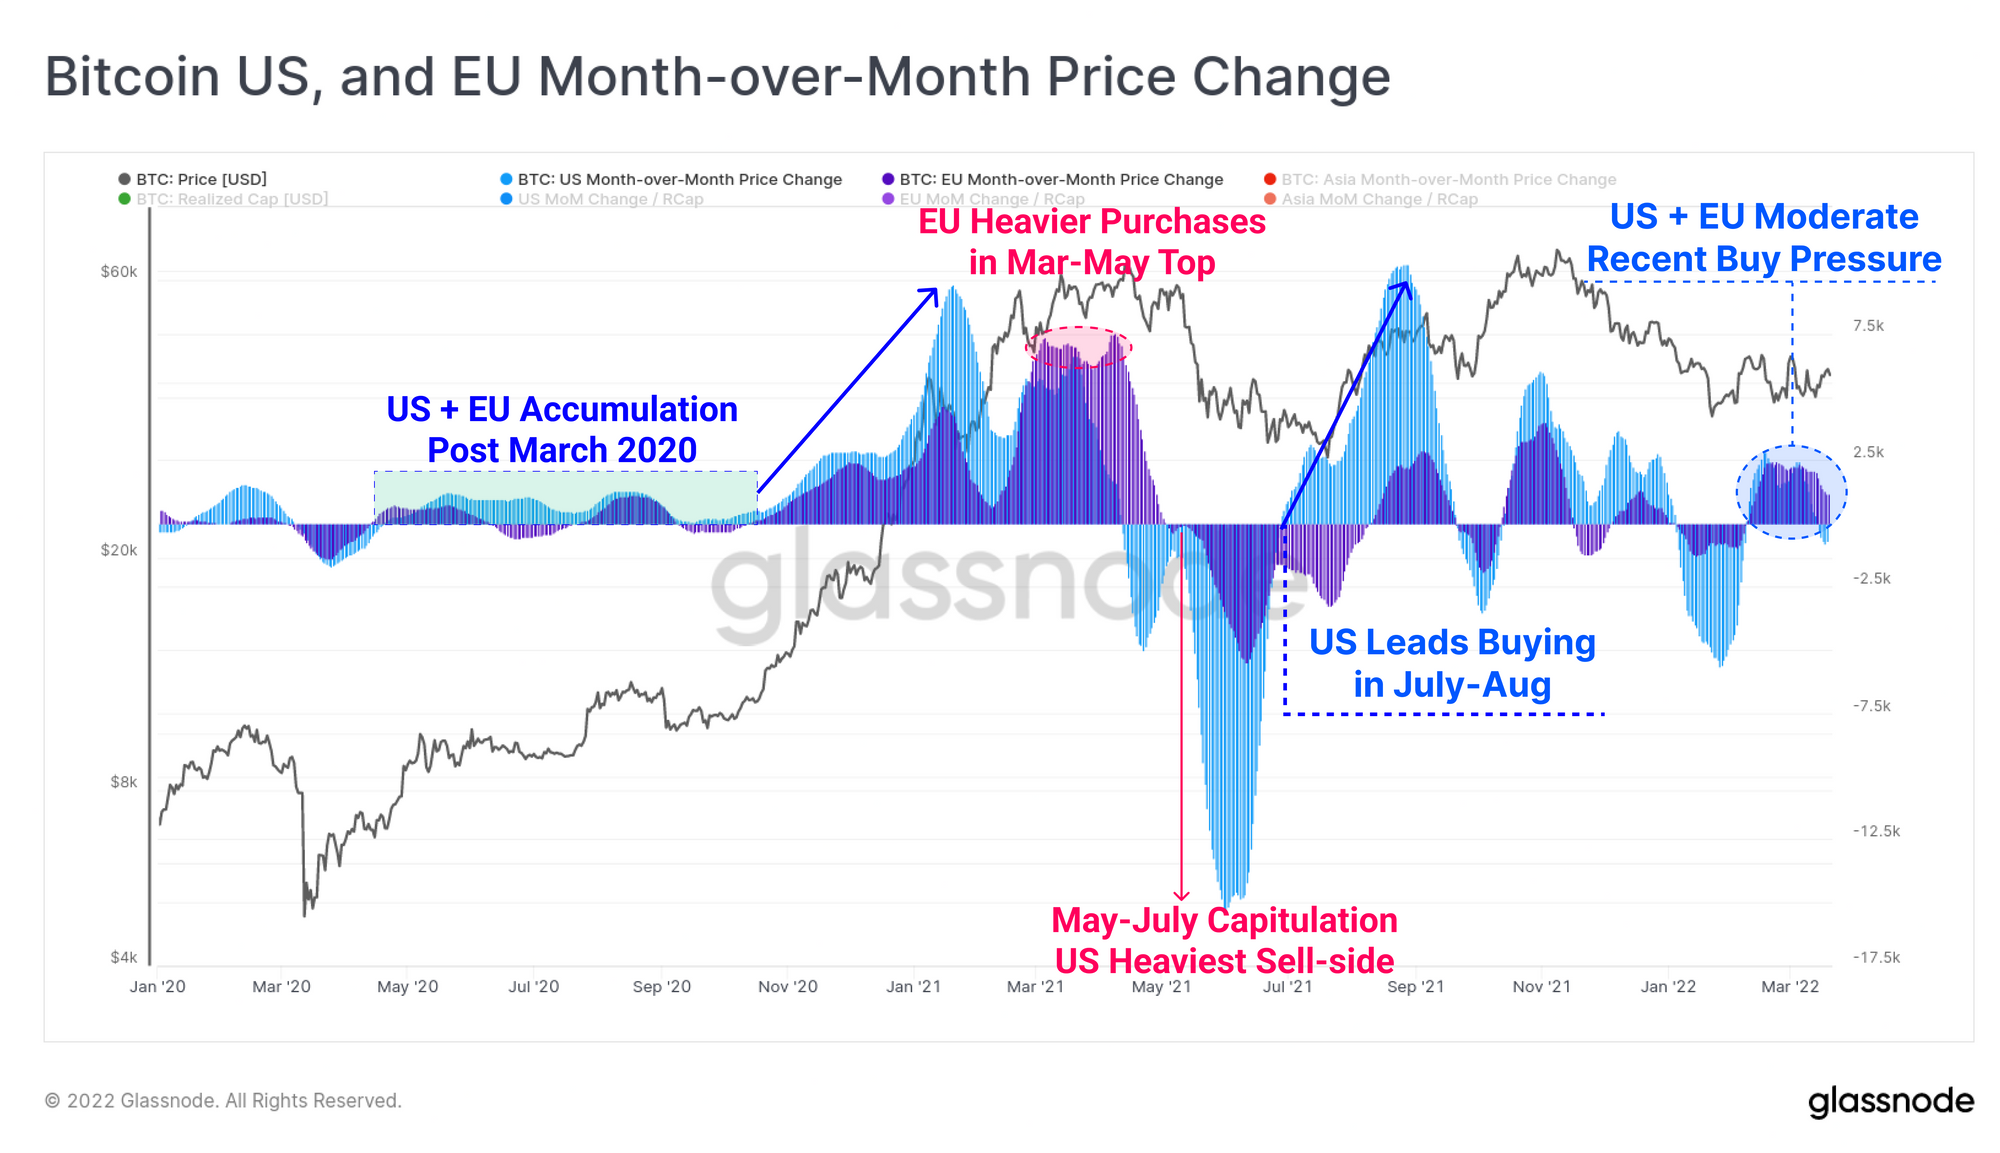 Glassnode Bitcoin US, and EU month-over-month price change